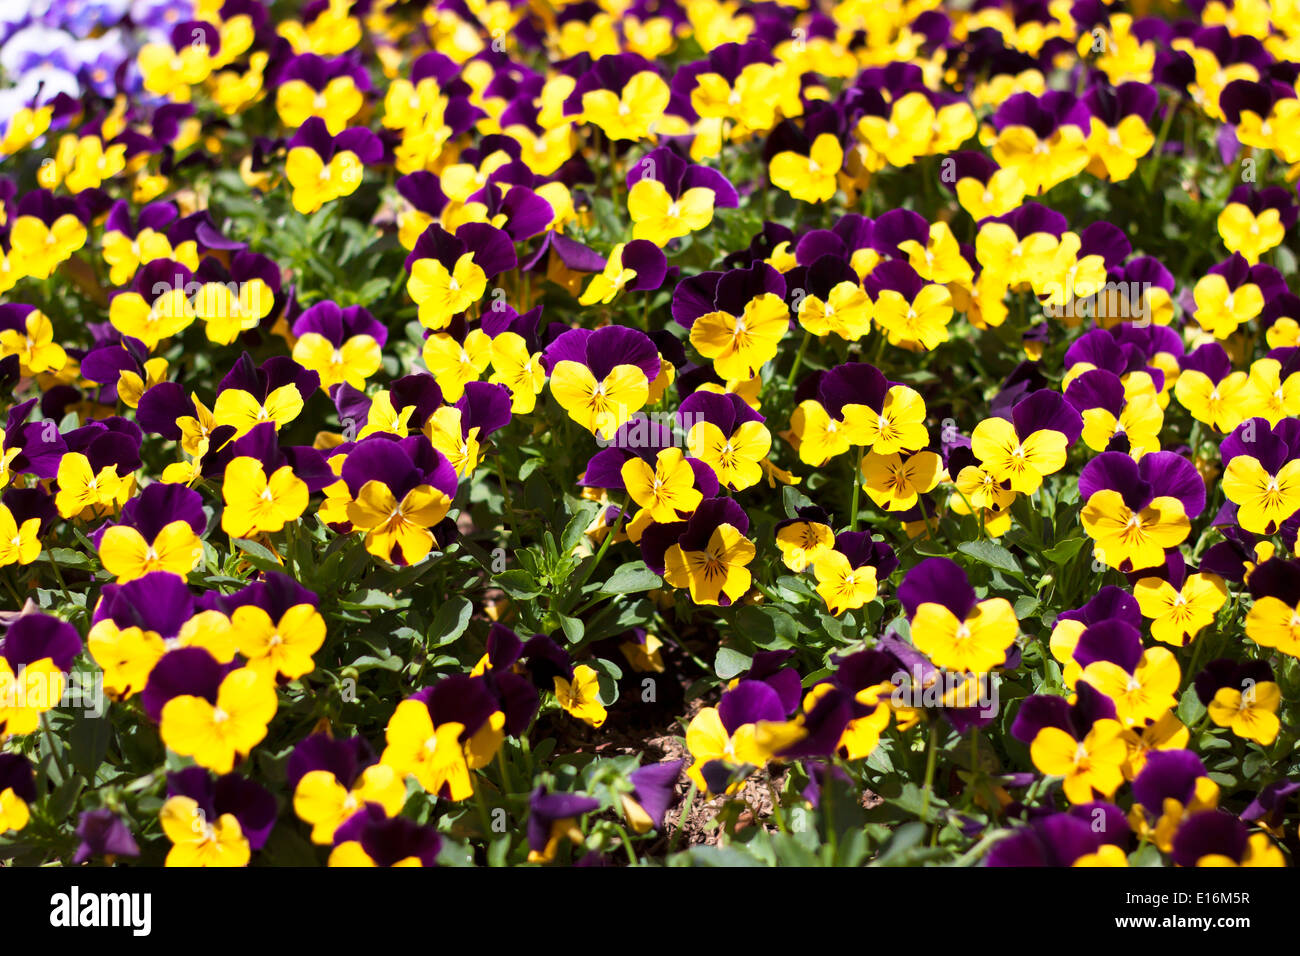 viola tricolor pansy, flower bed bloom in the garden. Stock Photo